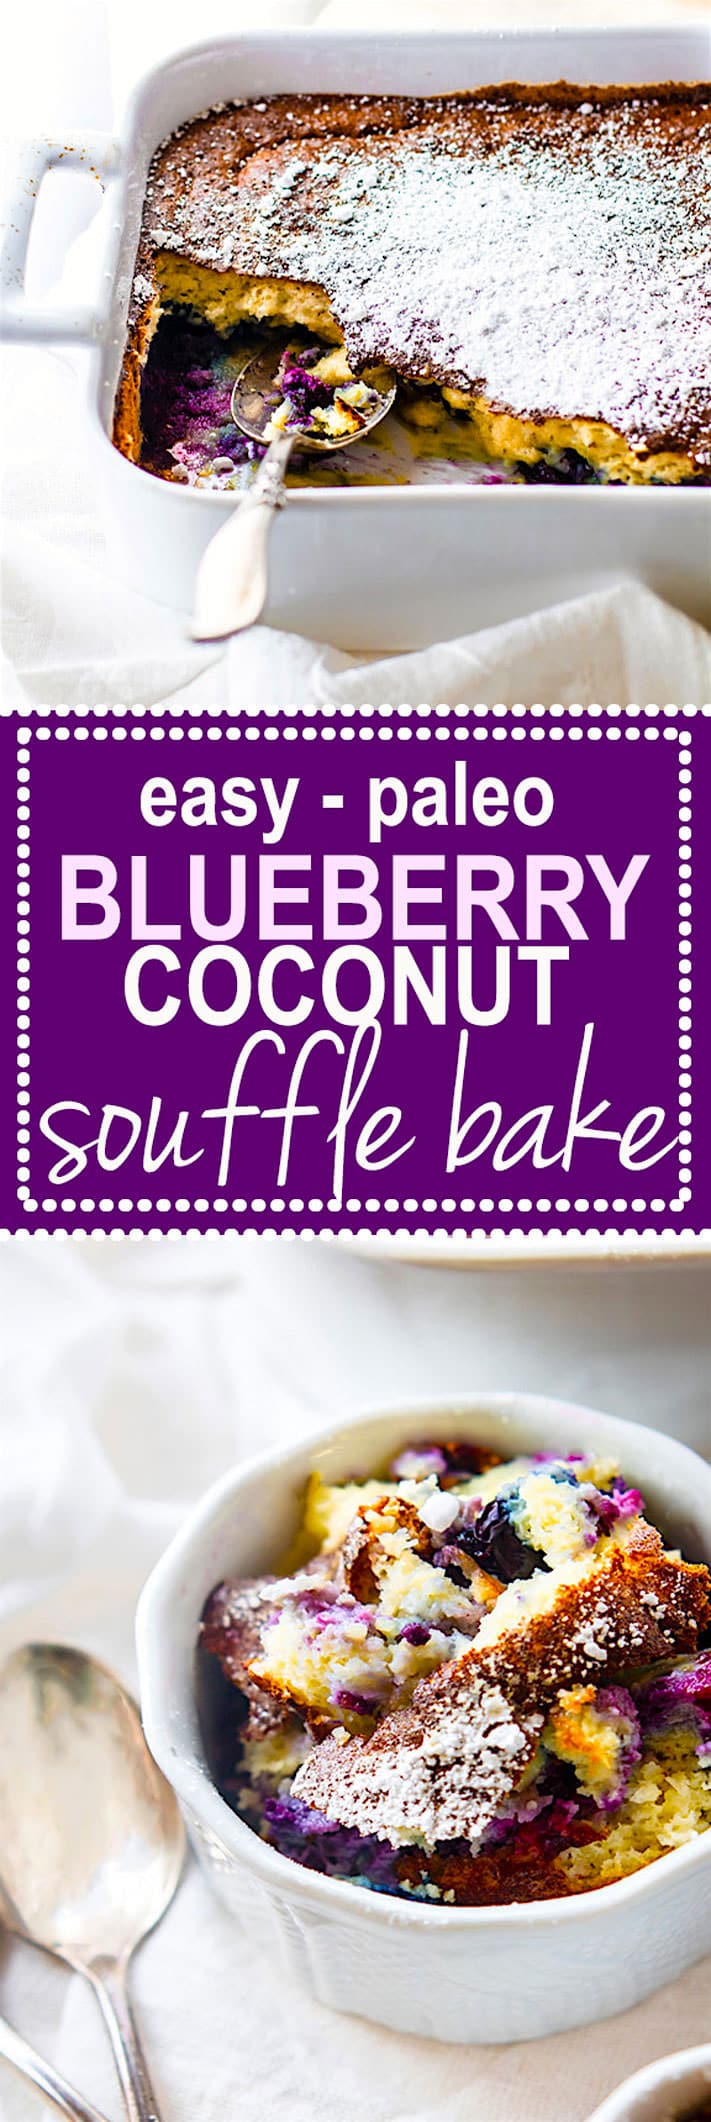 DREAMY Paleo Blueberry Coconut Soufflé Bake! Rich and creamy yet also airy and lightly sweet! This low carb paleo blueberry coconut soufflé bake is a twist on the classic French dish. A Healthy Fool Proof souffle that's great for a dessert or brunch! A custard like center but still light and flavorful. Feeds many, simple ingredients, and so delicious! @cottercrunch